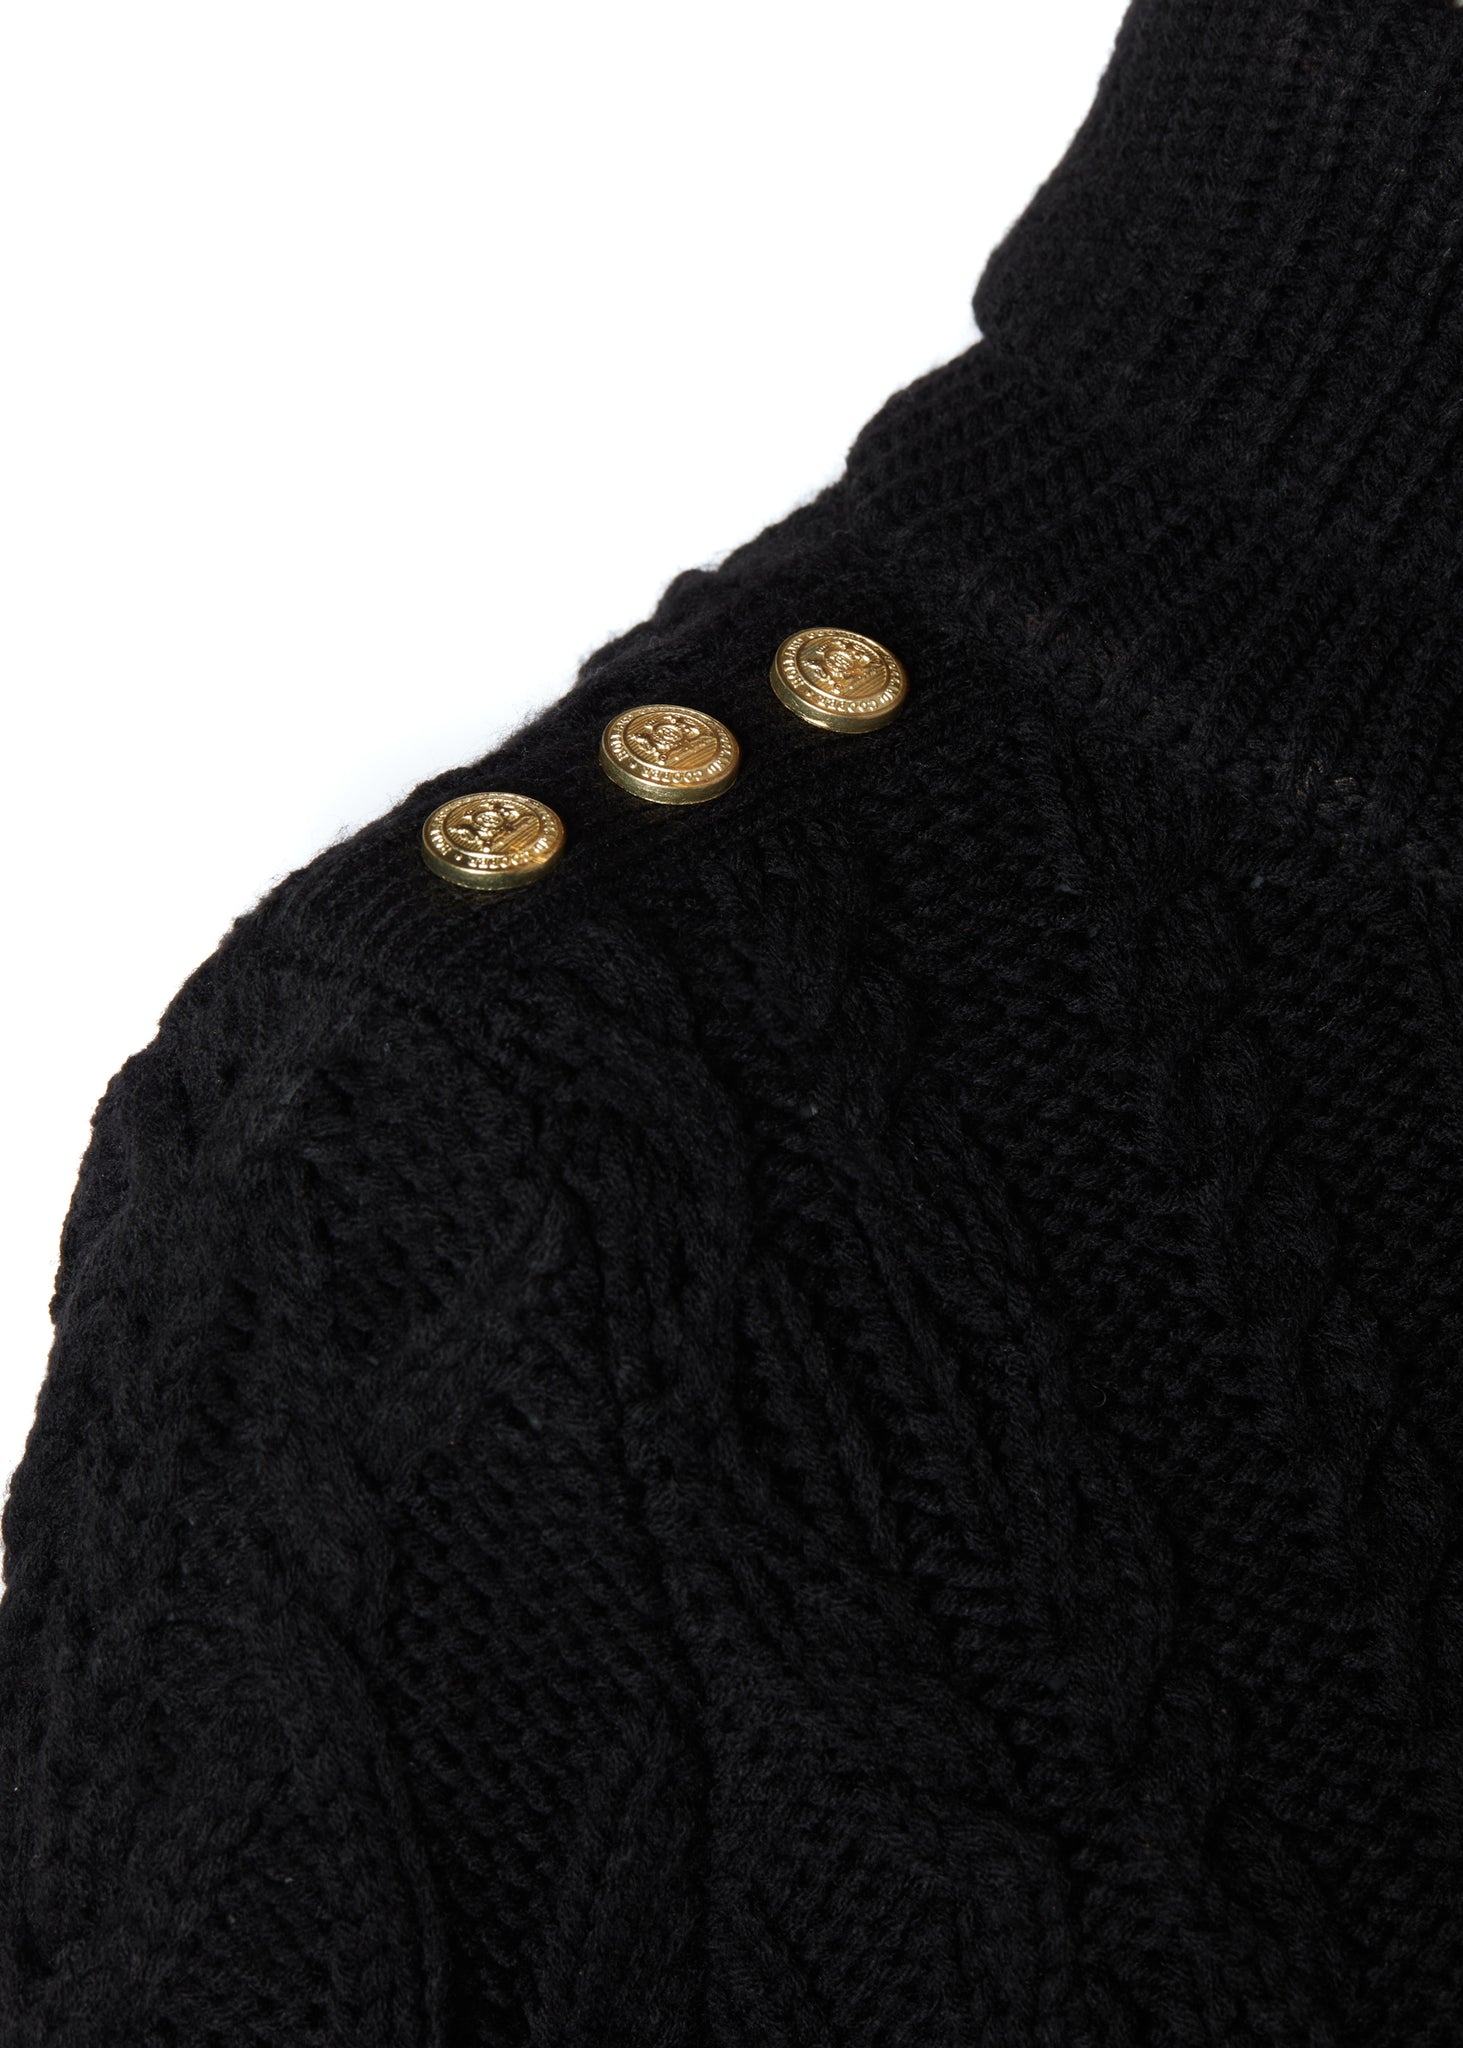 gold button detail across shoulders of a chunky cable knit roll neck jumper in black with dropped shoulders and thick ribbed cable trims and gold buttons on cuffs and collar